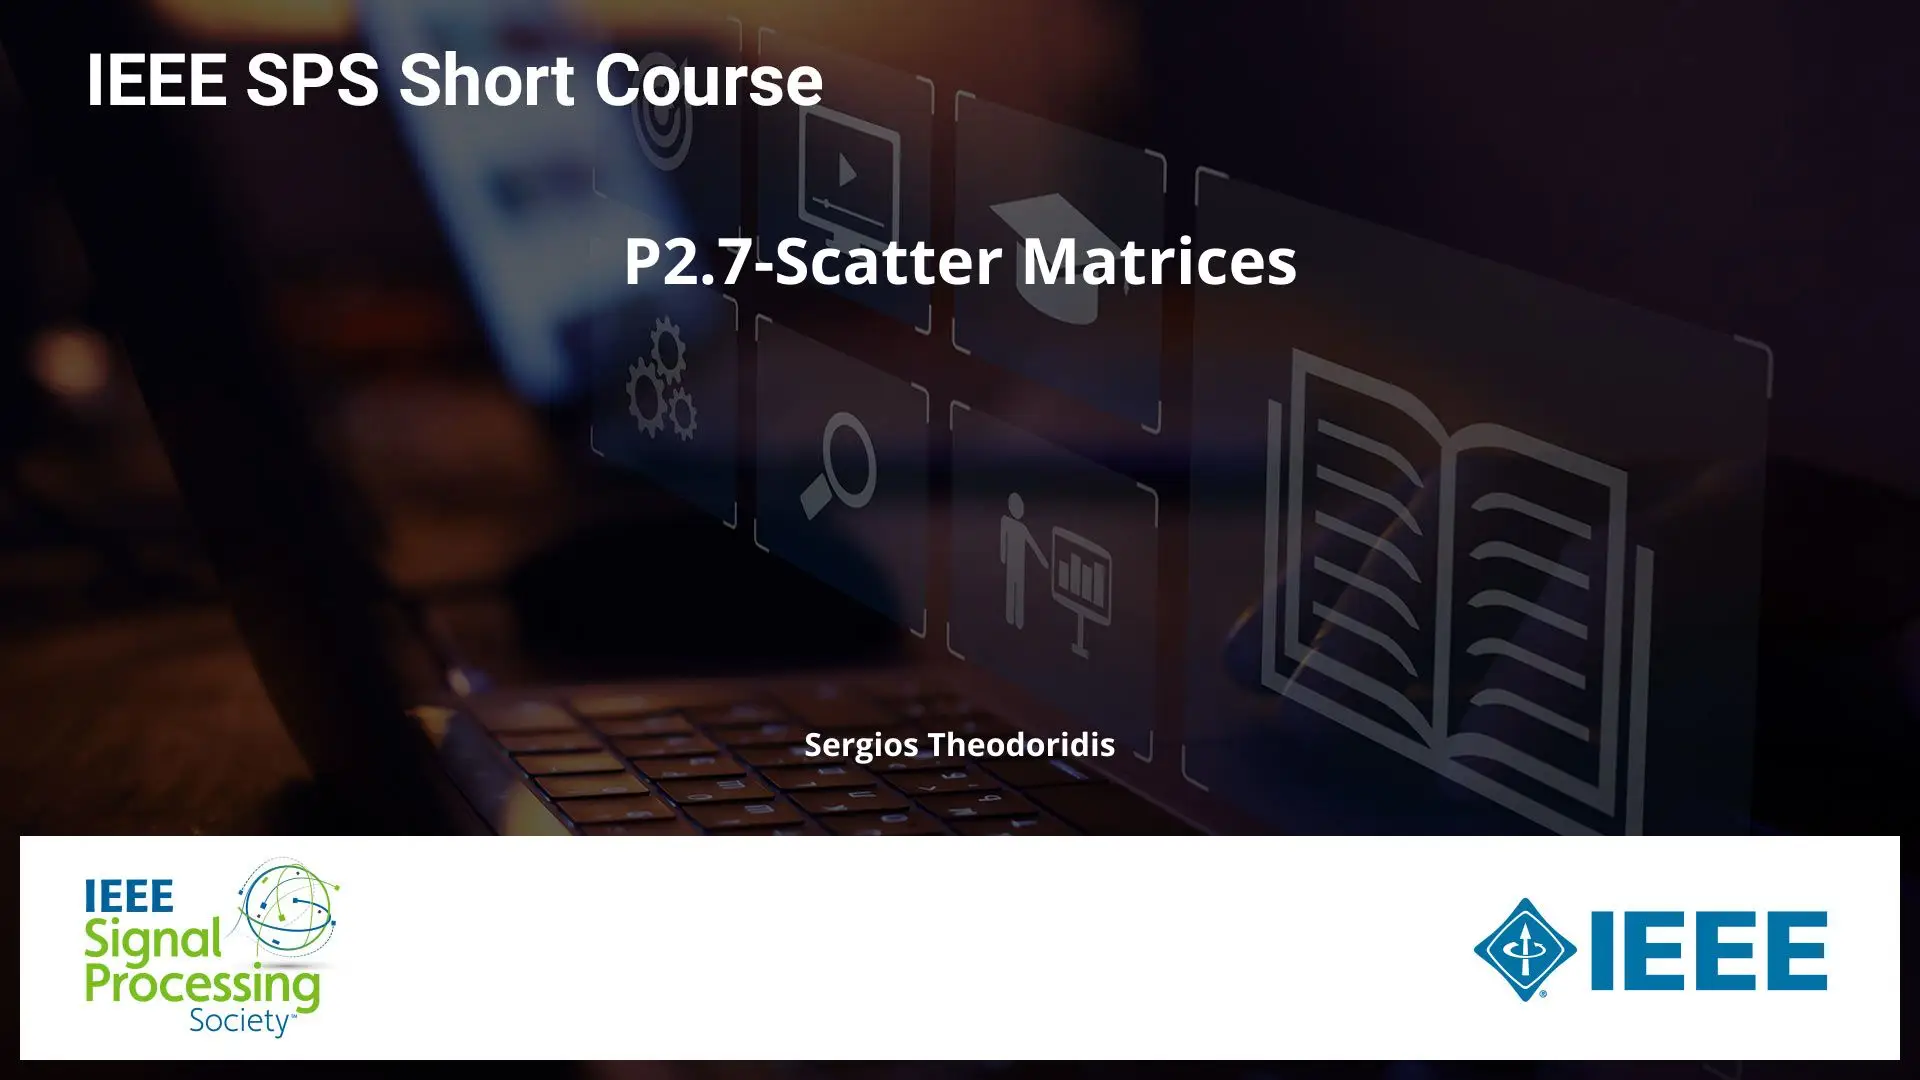 P2.7-Scatter Matrices